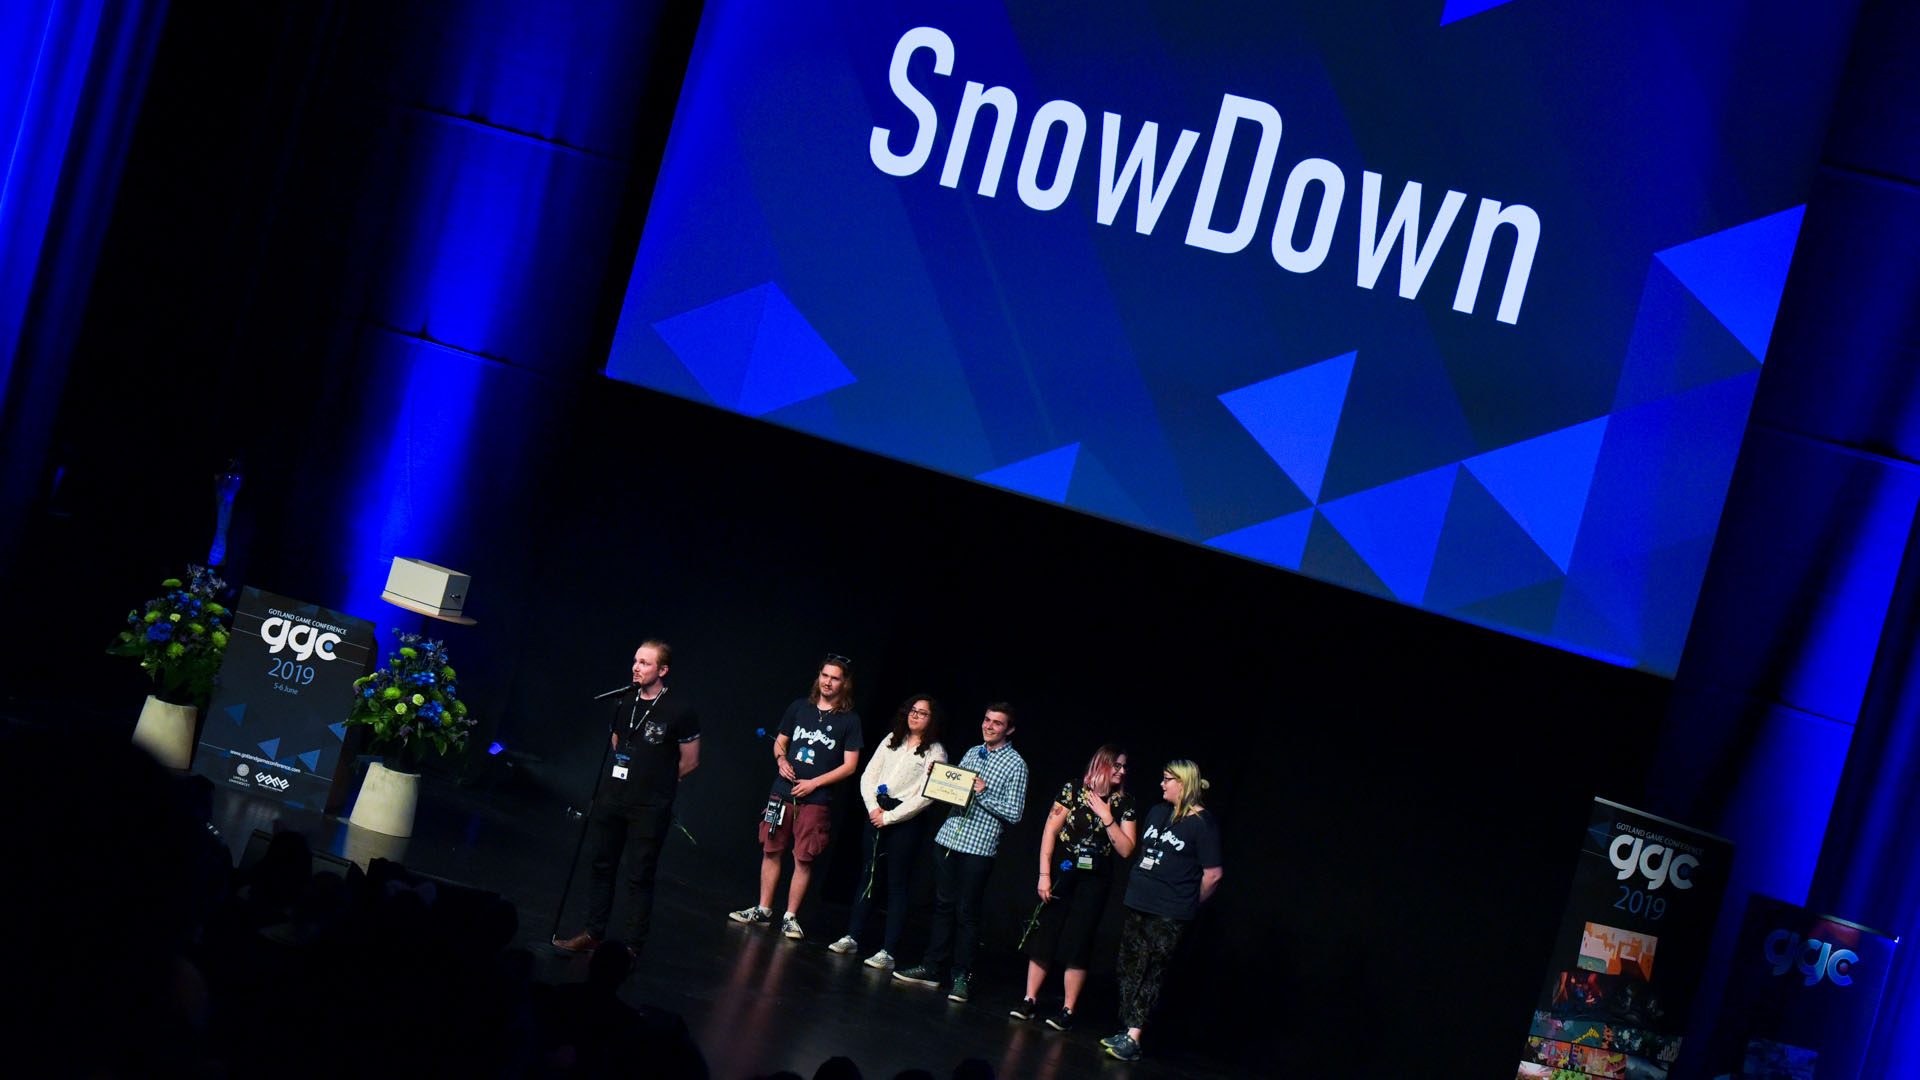 Snowdown won Best Arcade Experience at the Gotland Game Conference 2019.